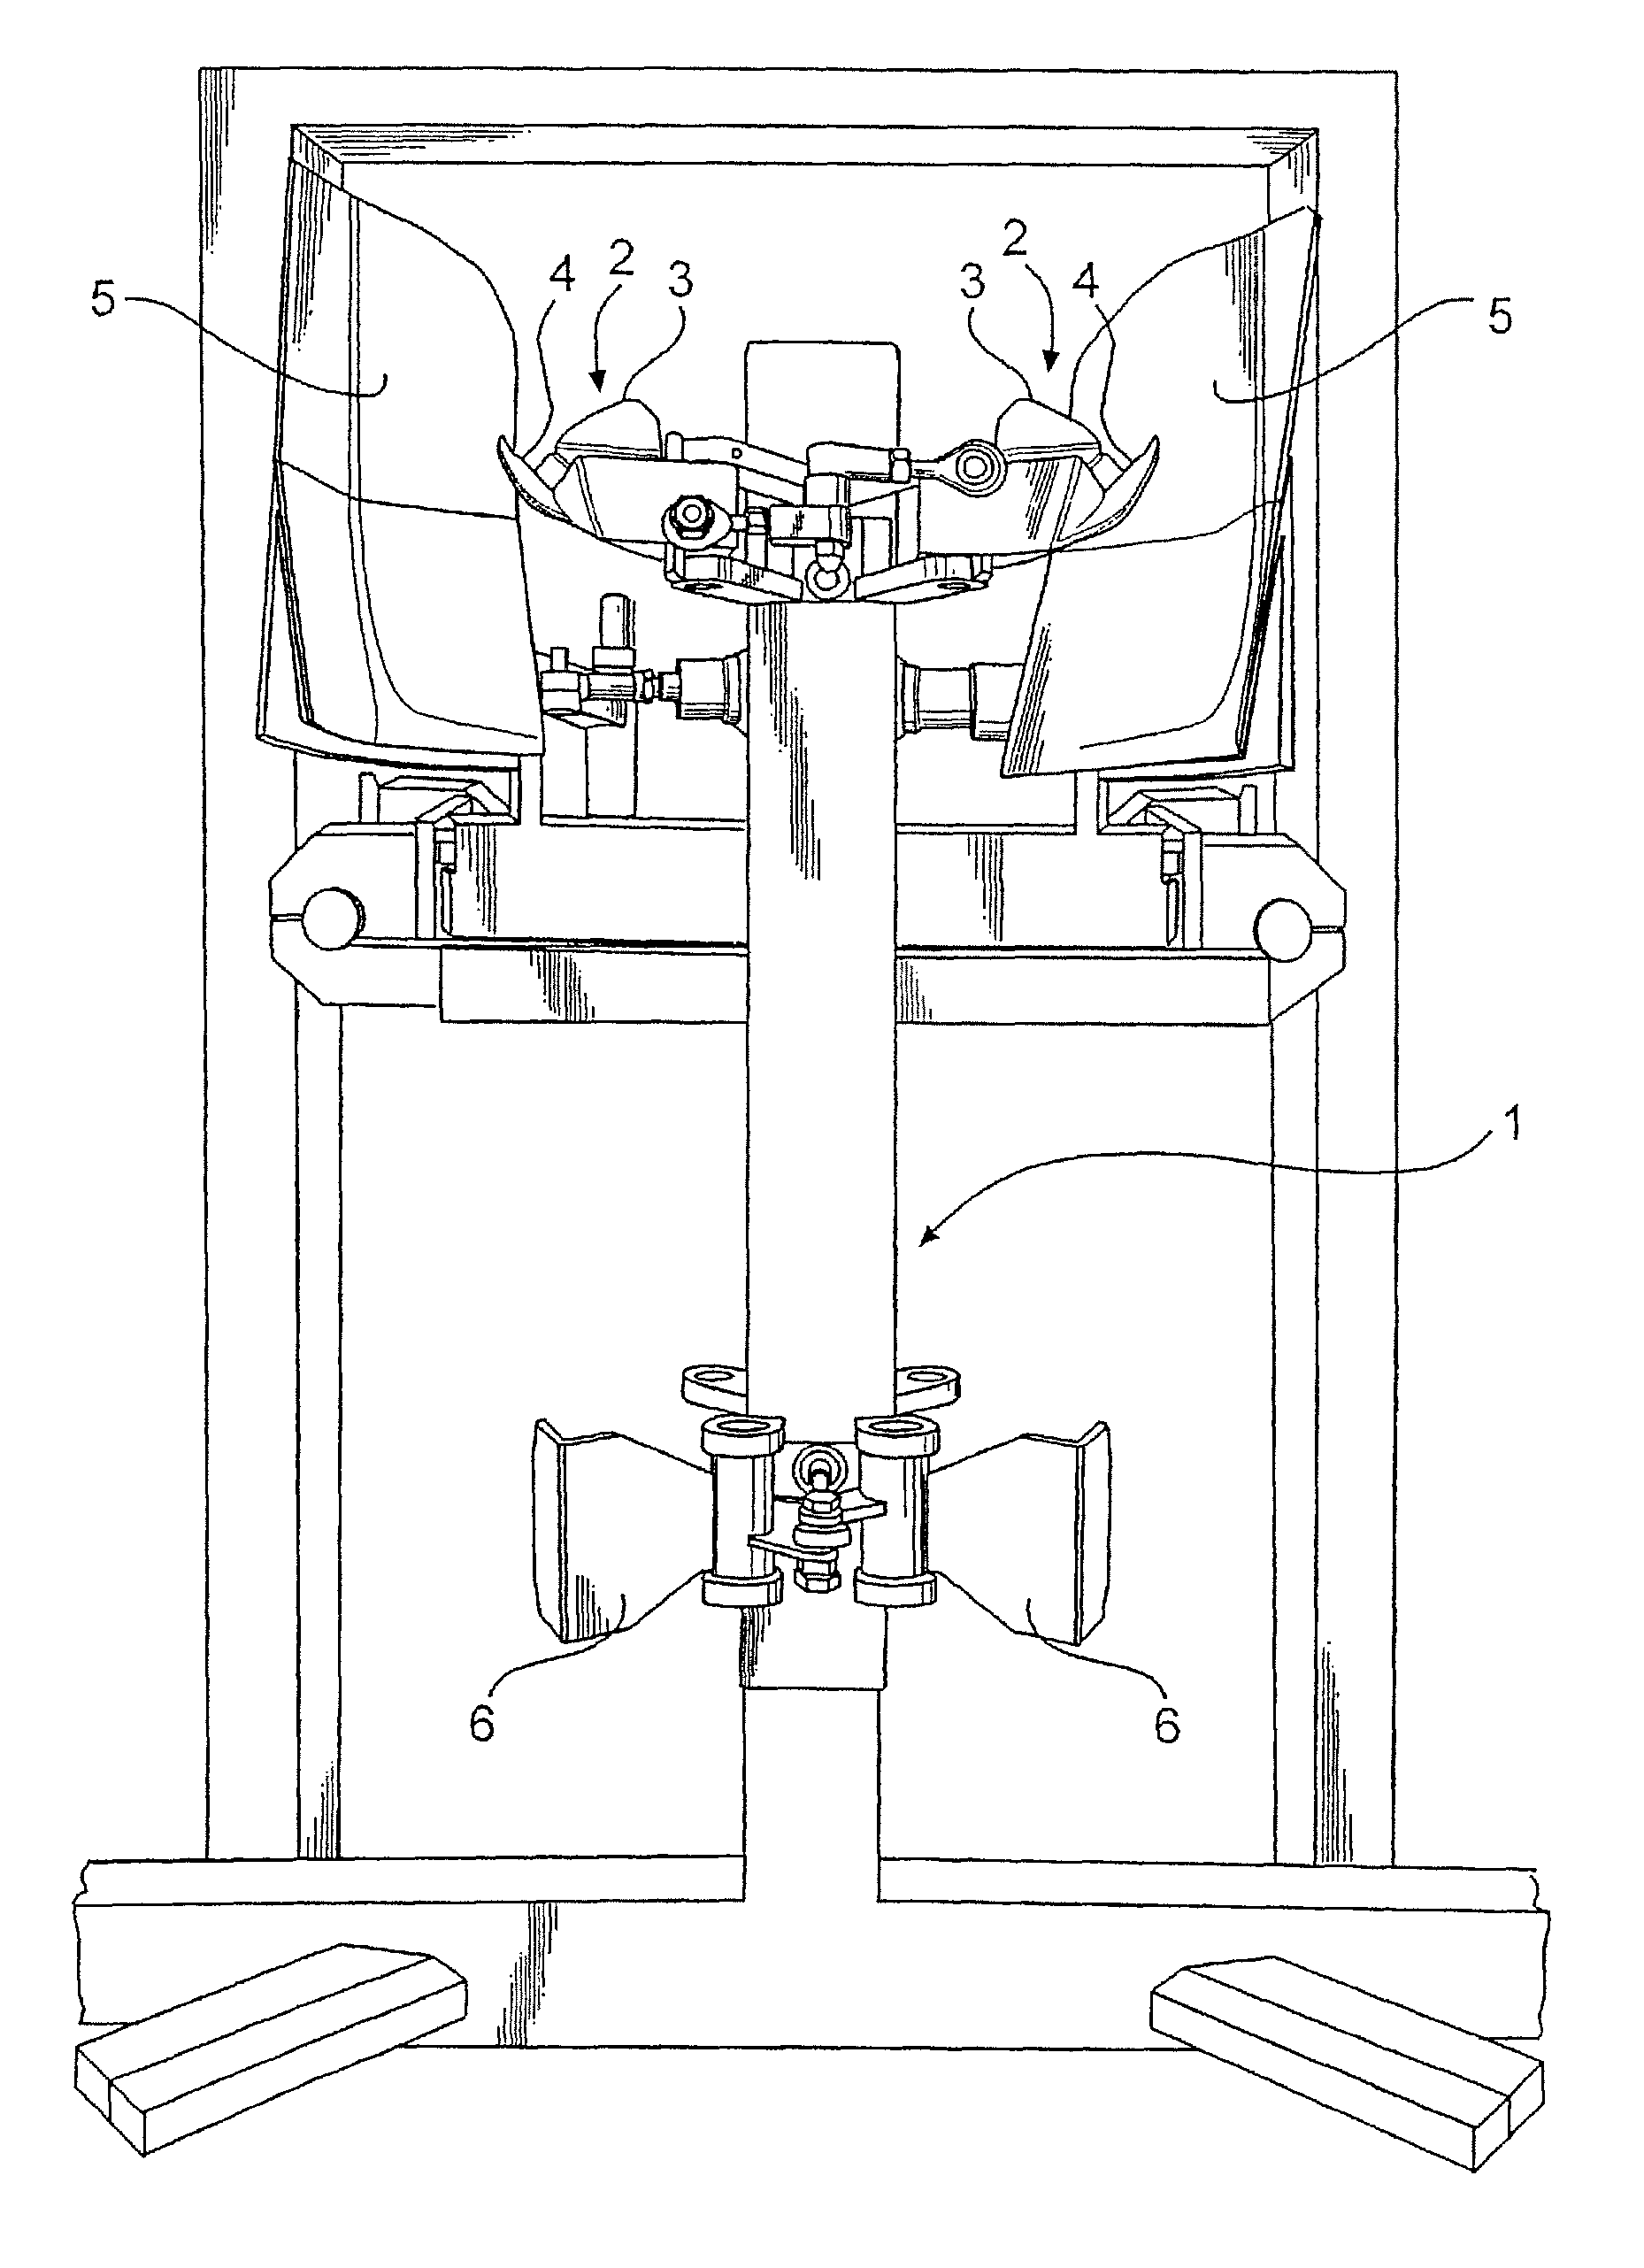 Apparatus and method for cutting-free of tender-loin